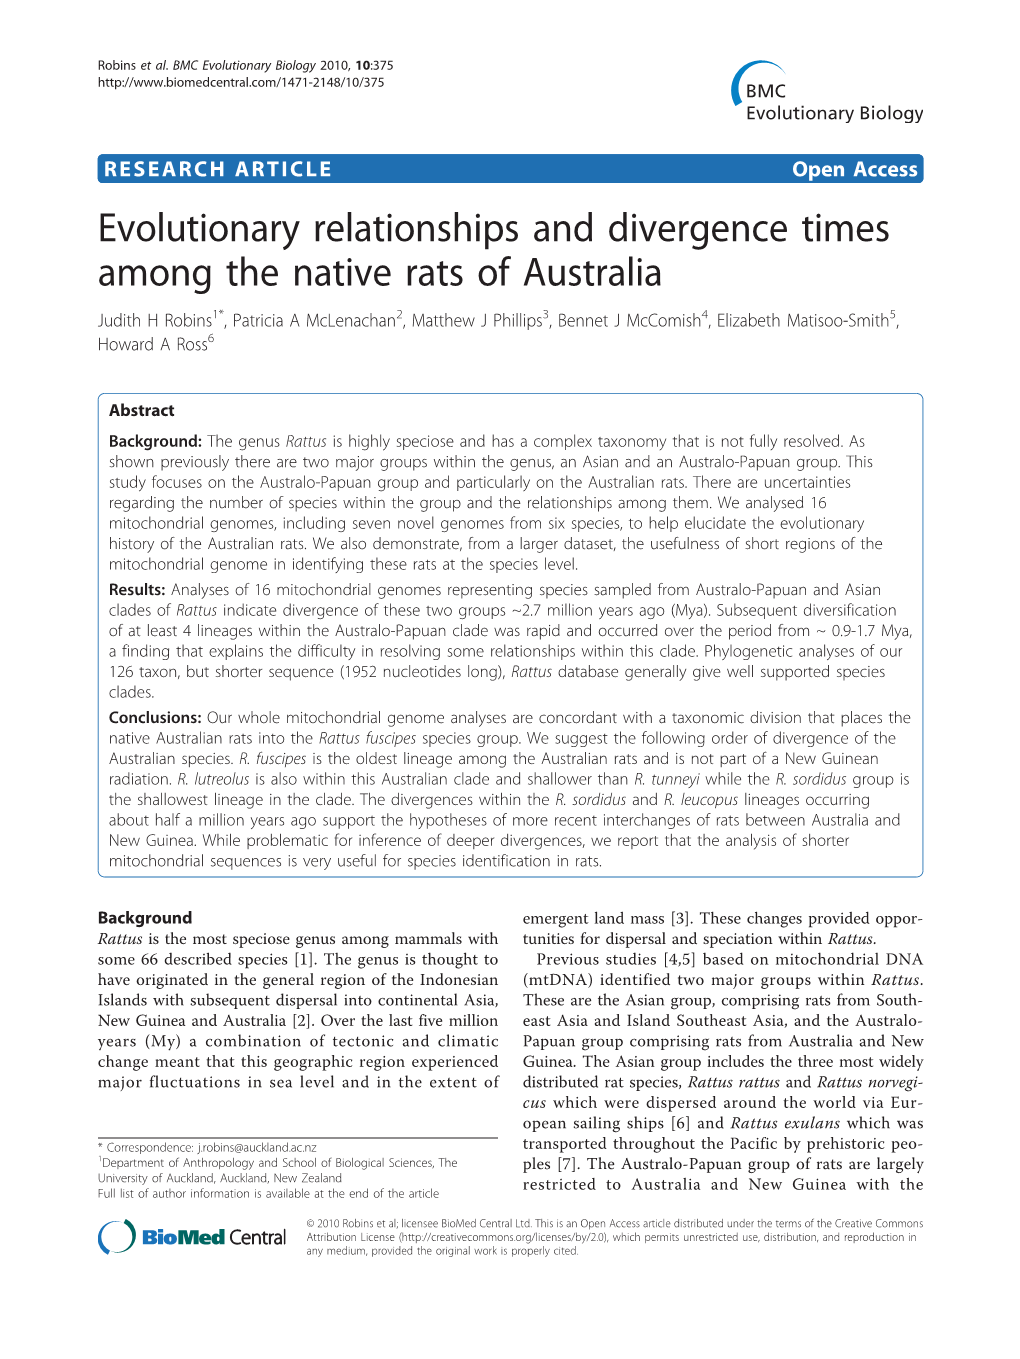 Evolutionary Relationships and Divergence Times Among the Native